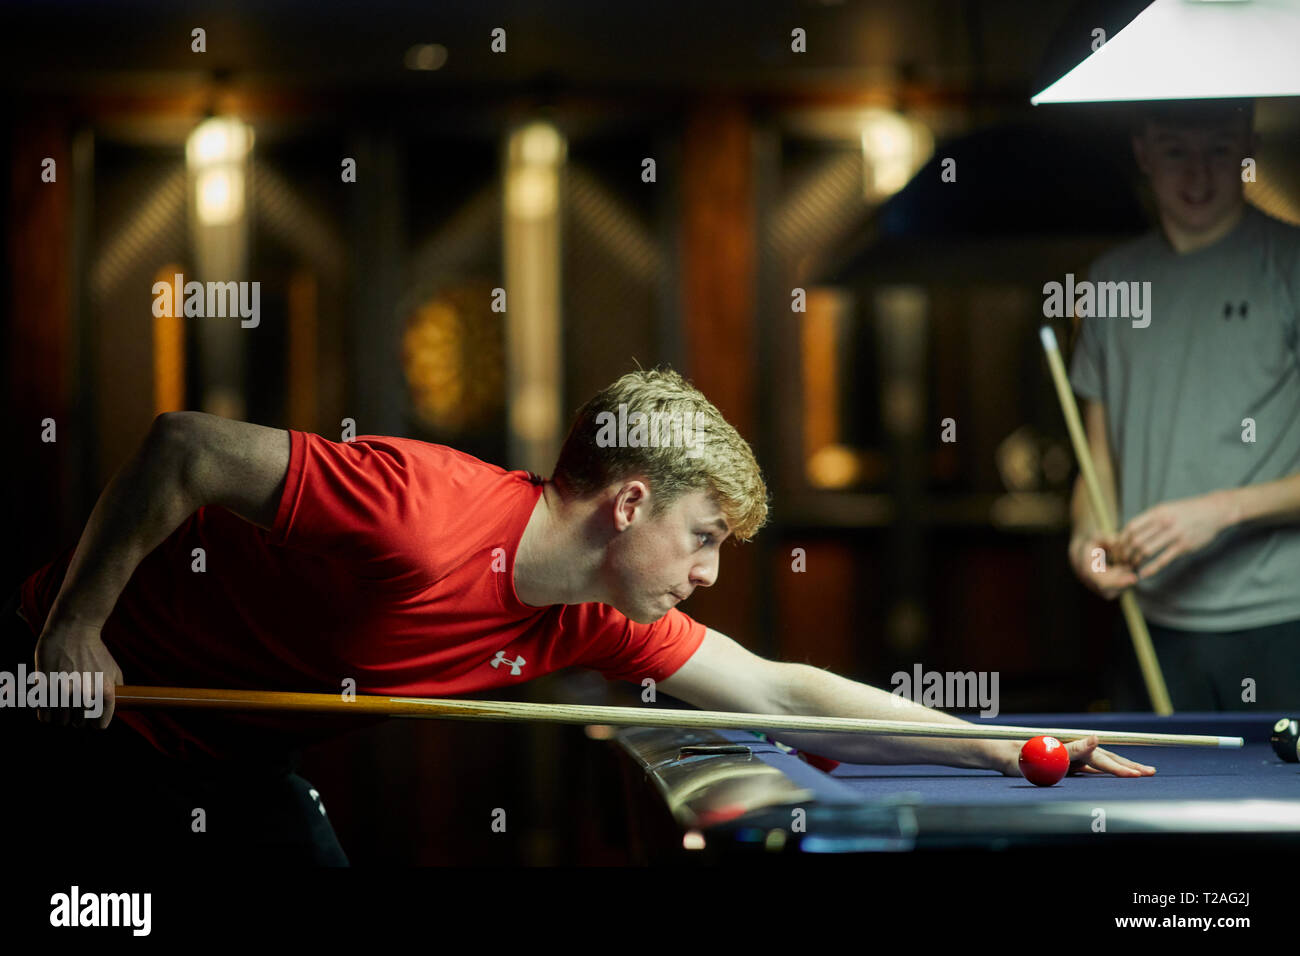 Pool table at RILEYS LIVERPOOL refurbished snooker hall hosting large screen live football Stock Photo